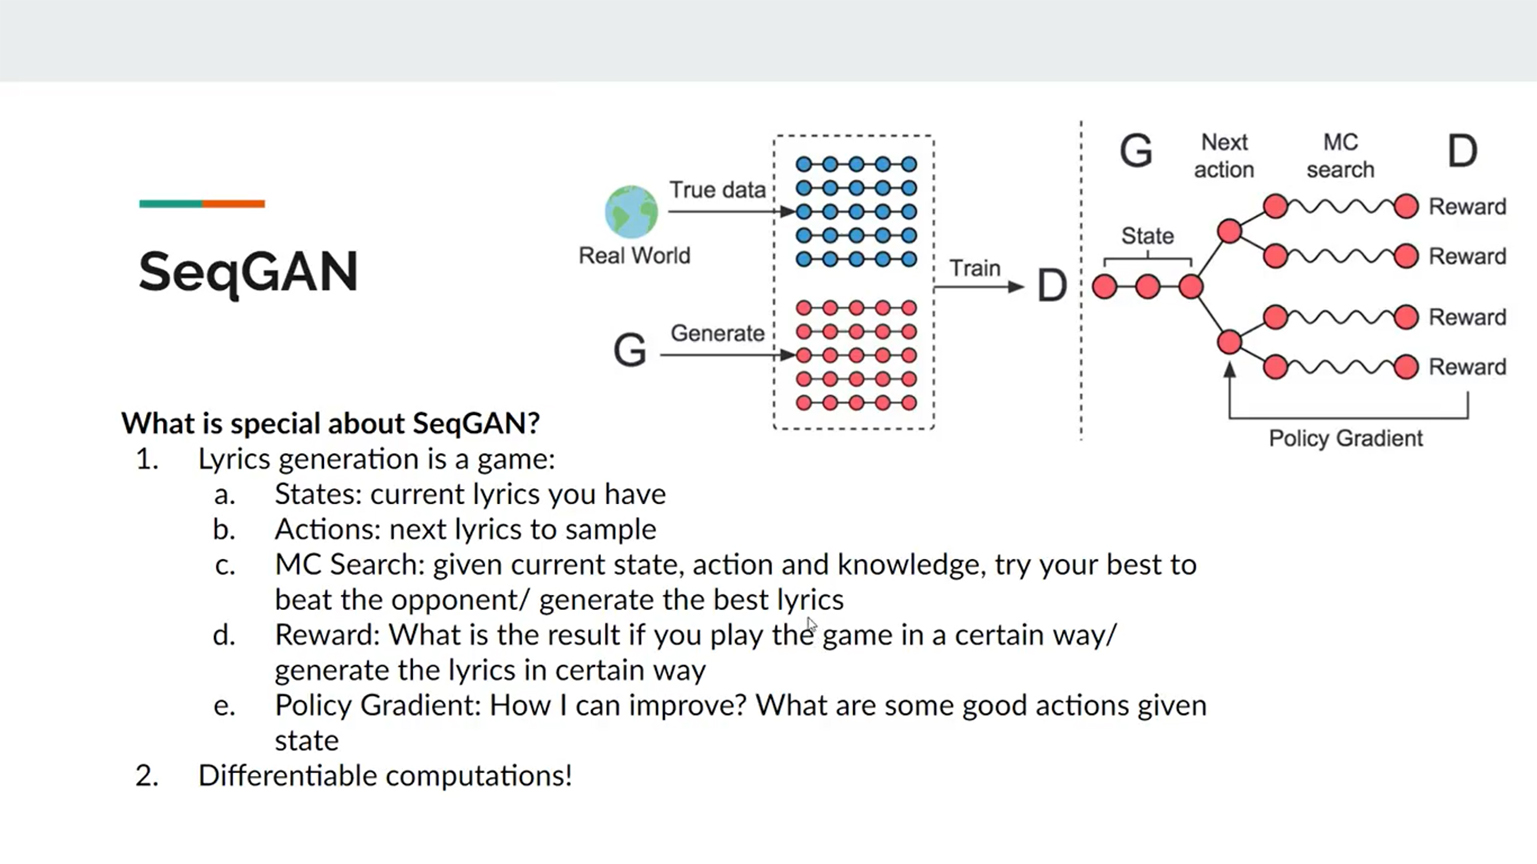 A screenshot of a powerpoint presentation explaining the project SeqGAN.